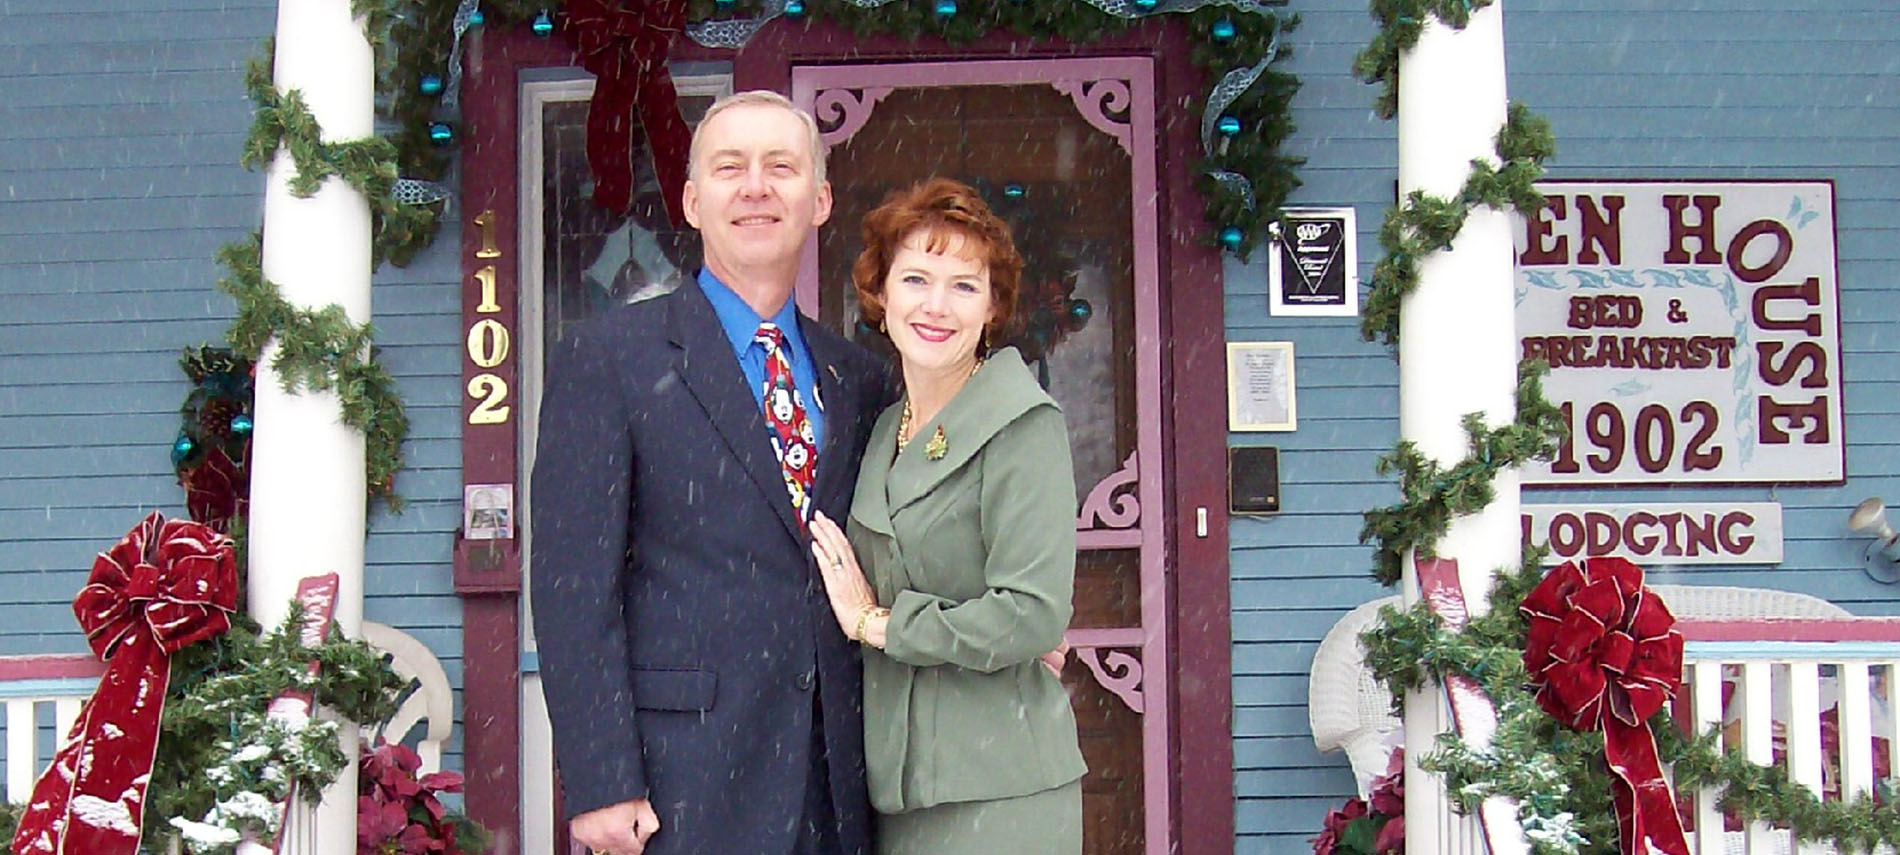 Innkeepers Sallie and Welling Clark enjoy the Christmas and holiday season with decorations to grace the inn.